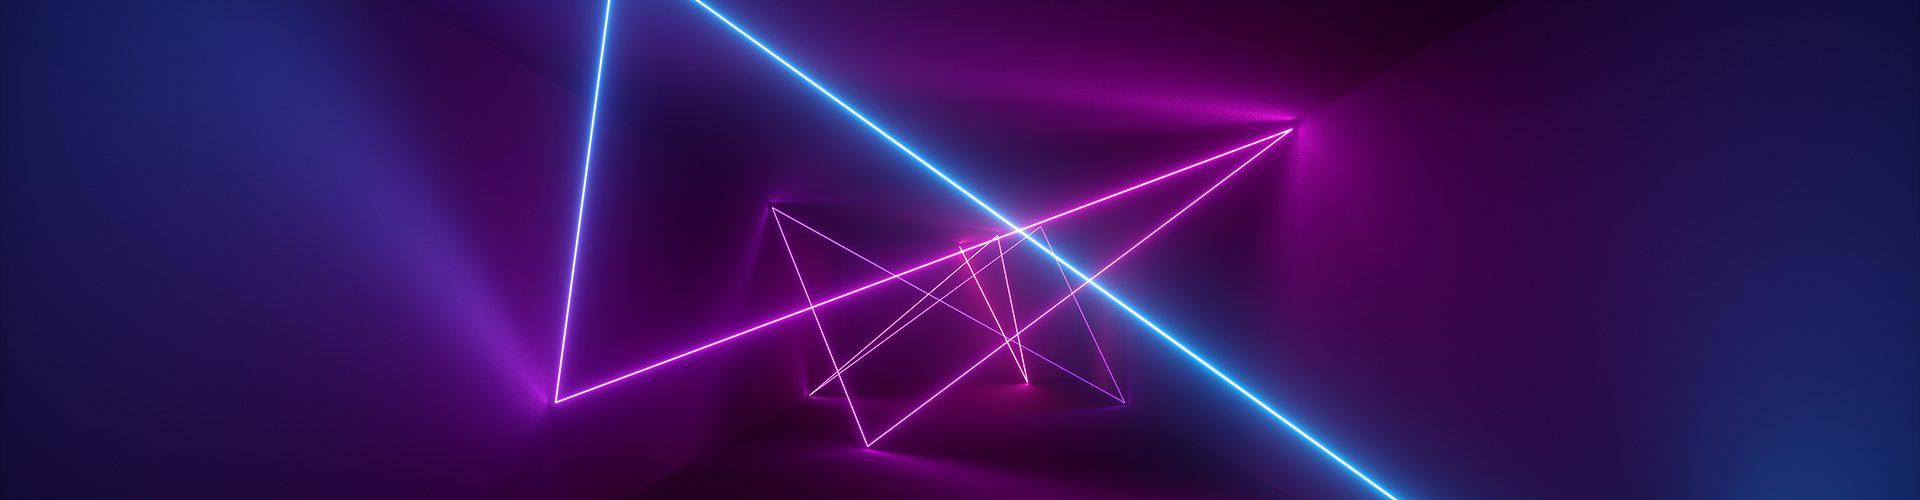 A neon purple laser casts a vibrant violet and magenta light across the room.